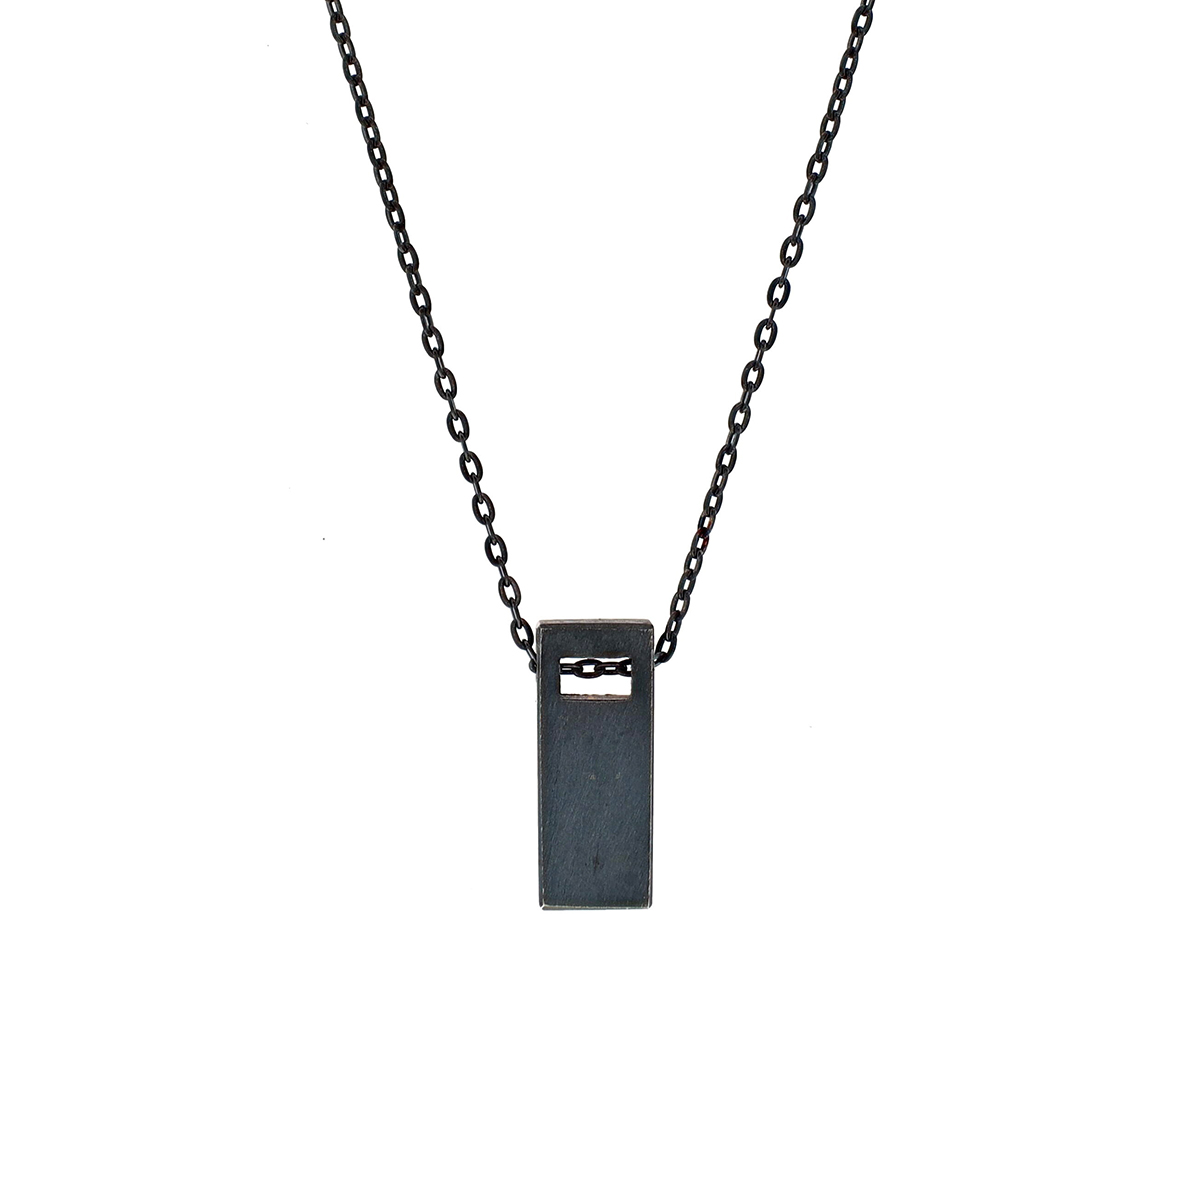 Oxidized Sterling Silver Rectangle Cut Out Pendant and Chain